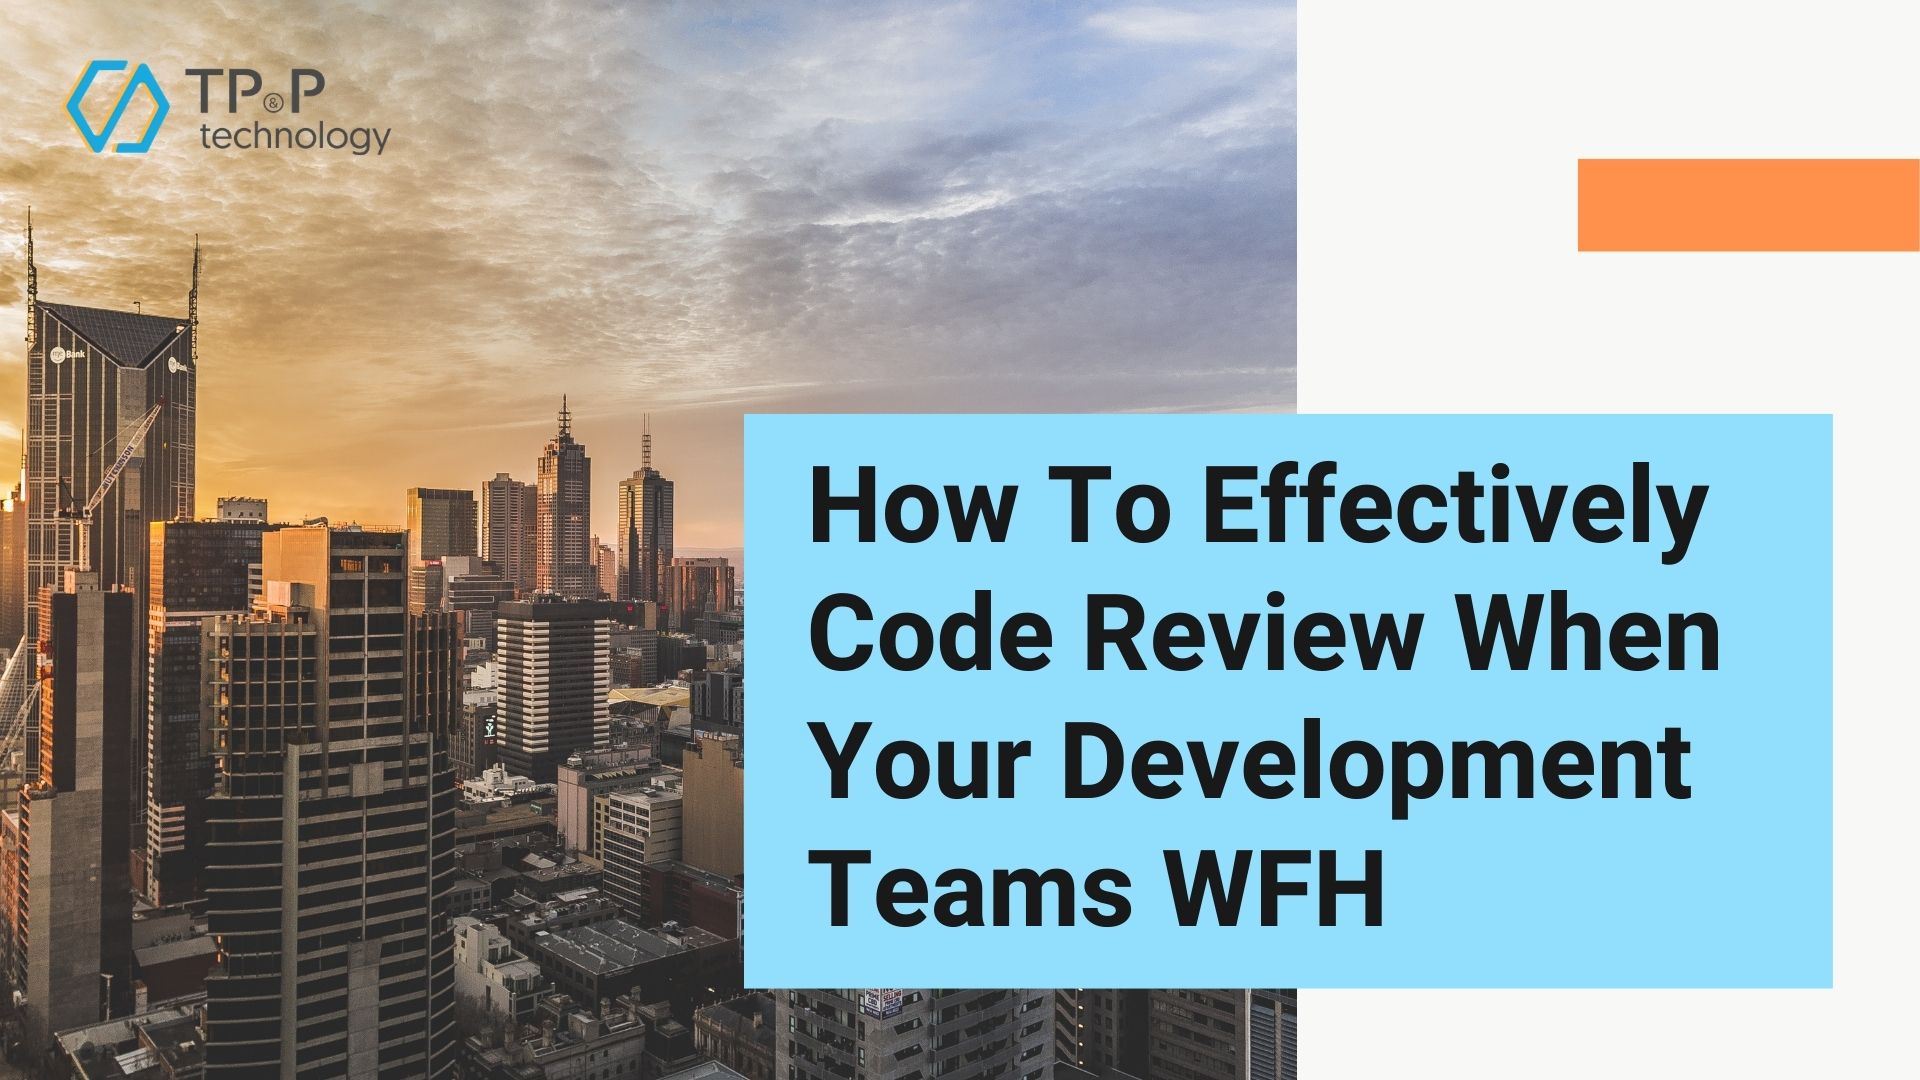 How To Effectively Code Review When Your Development Teams WFH